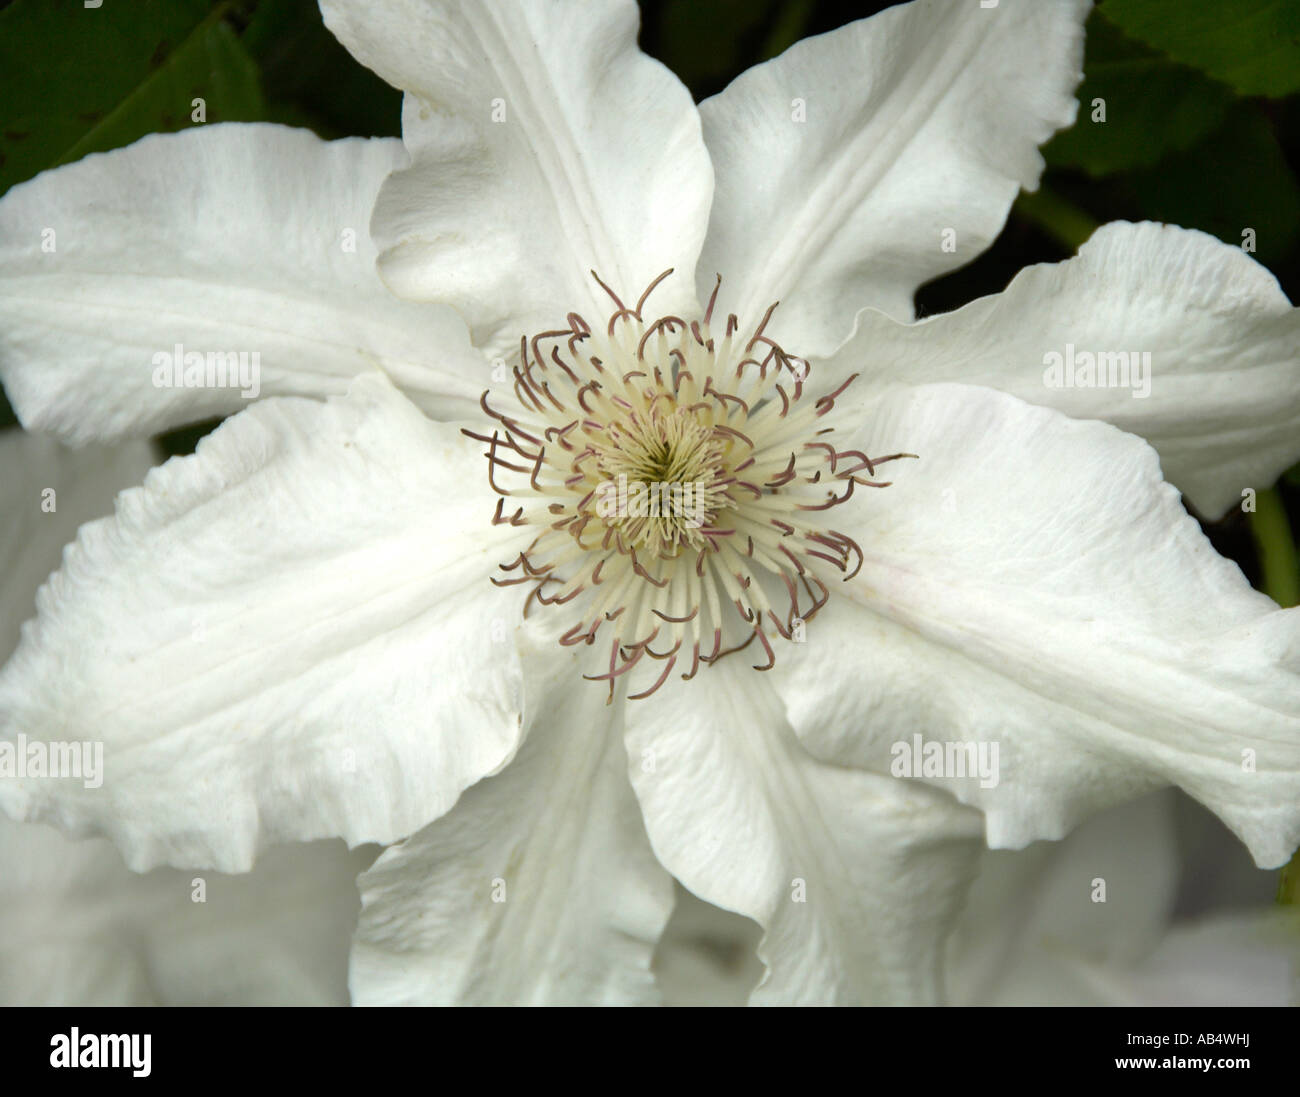 Clematis Hyde Hall White Climber Stock Photo